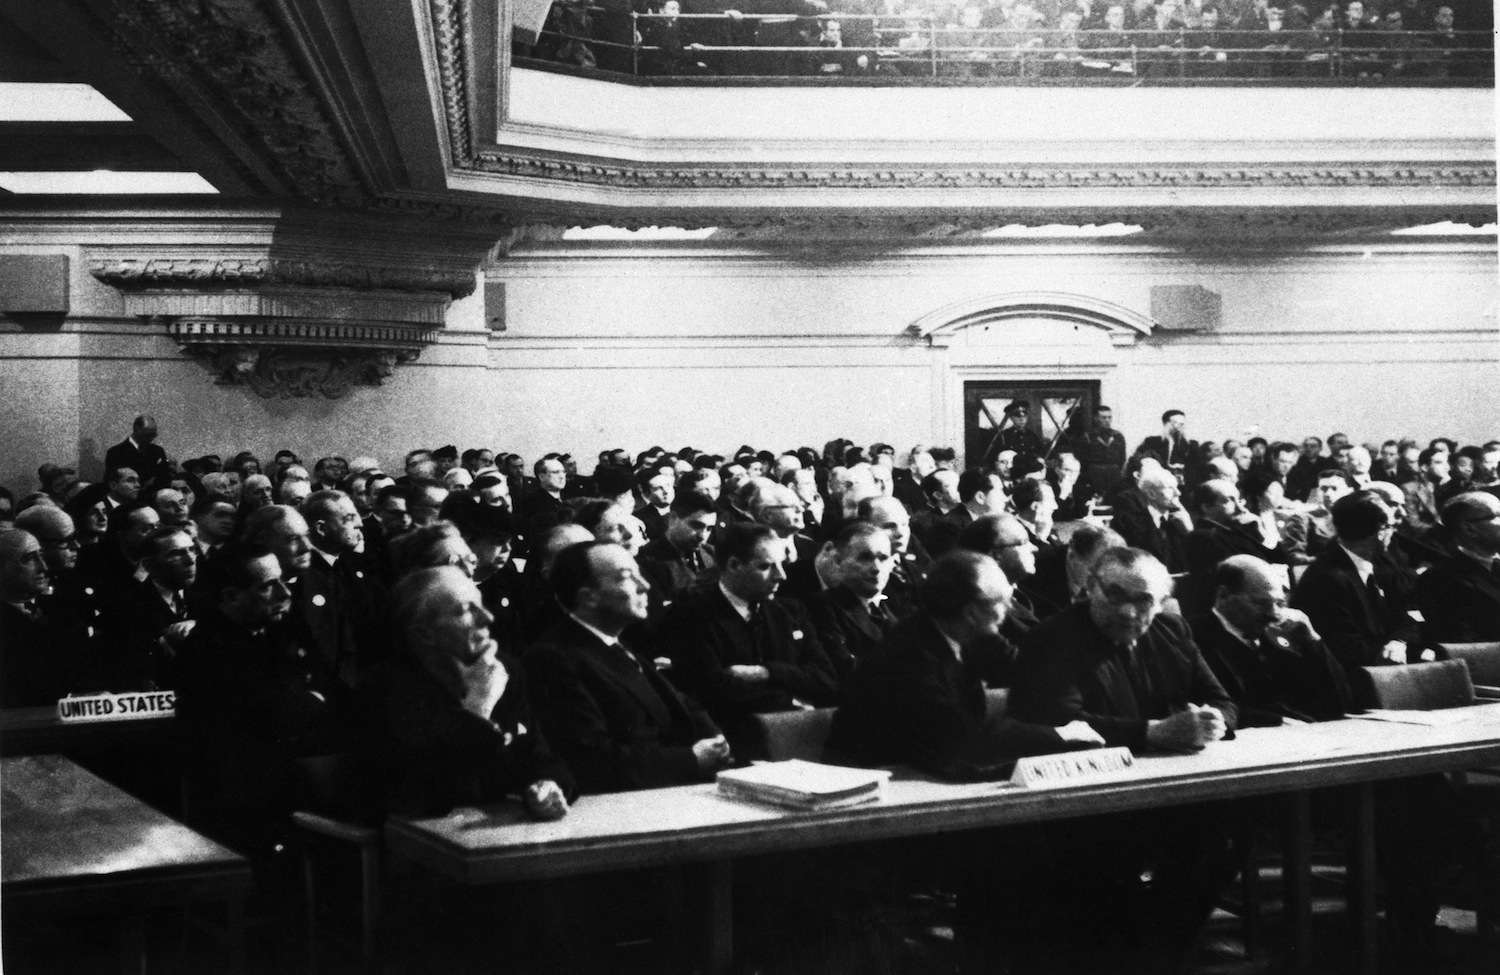 January 10, 1946: The General Assembly of the United Nations Convenes for the First Time